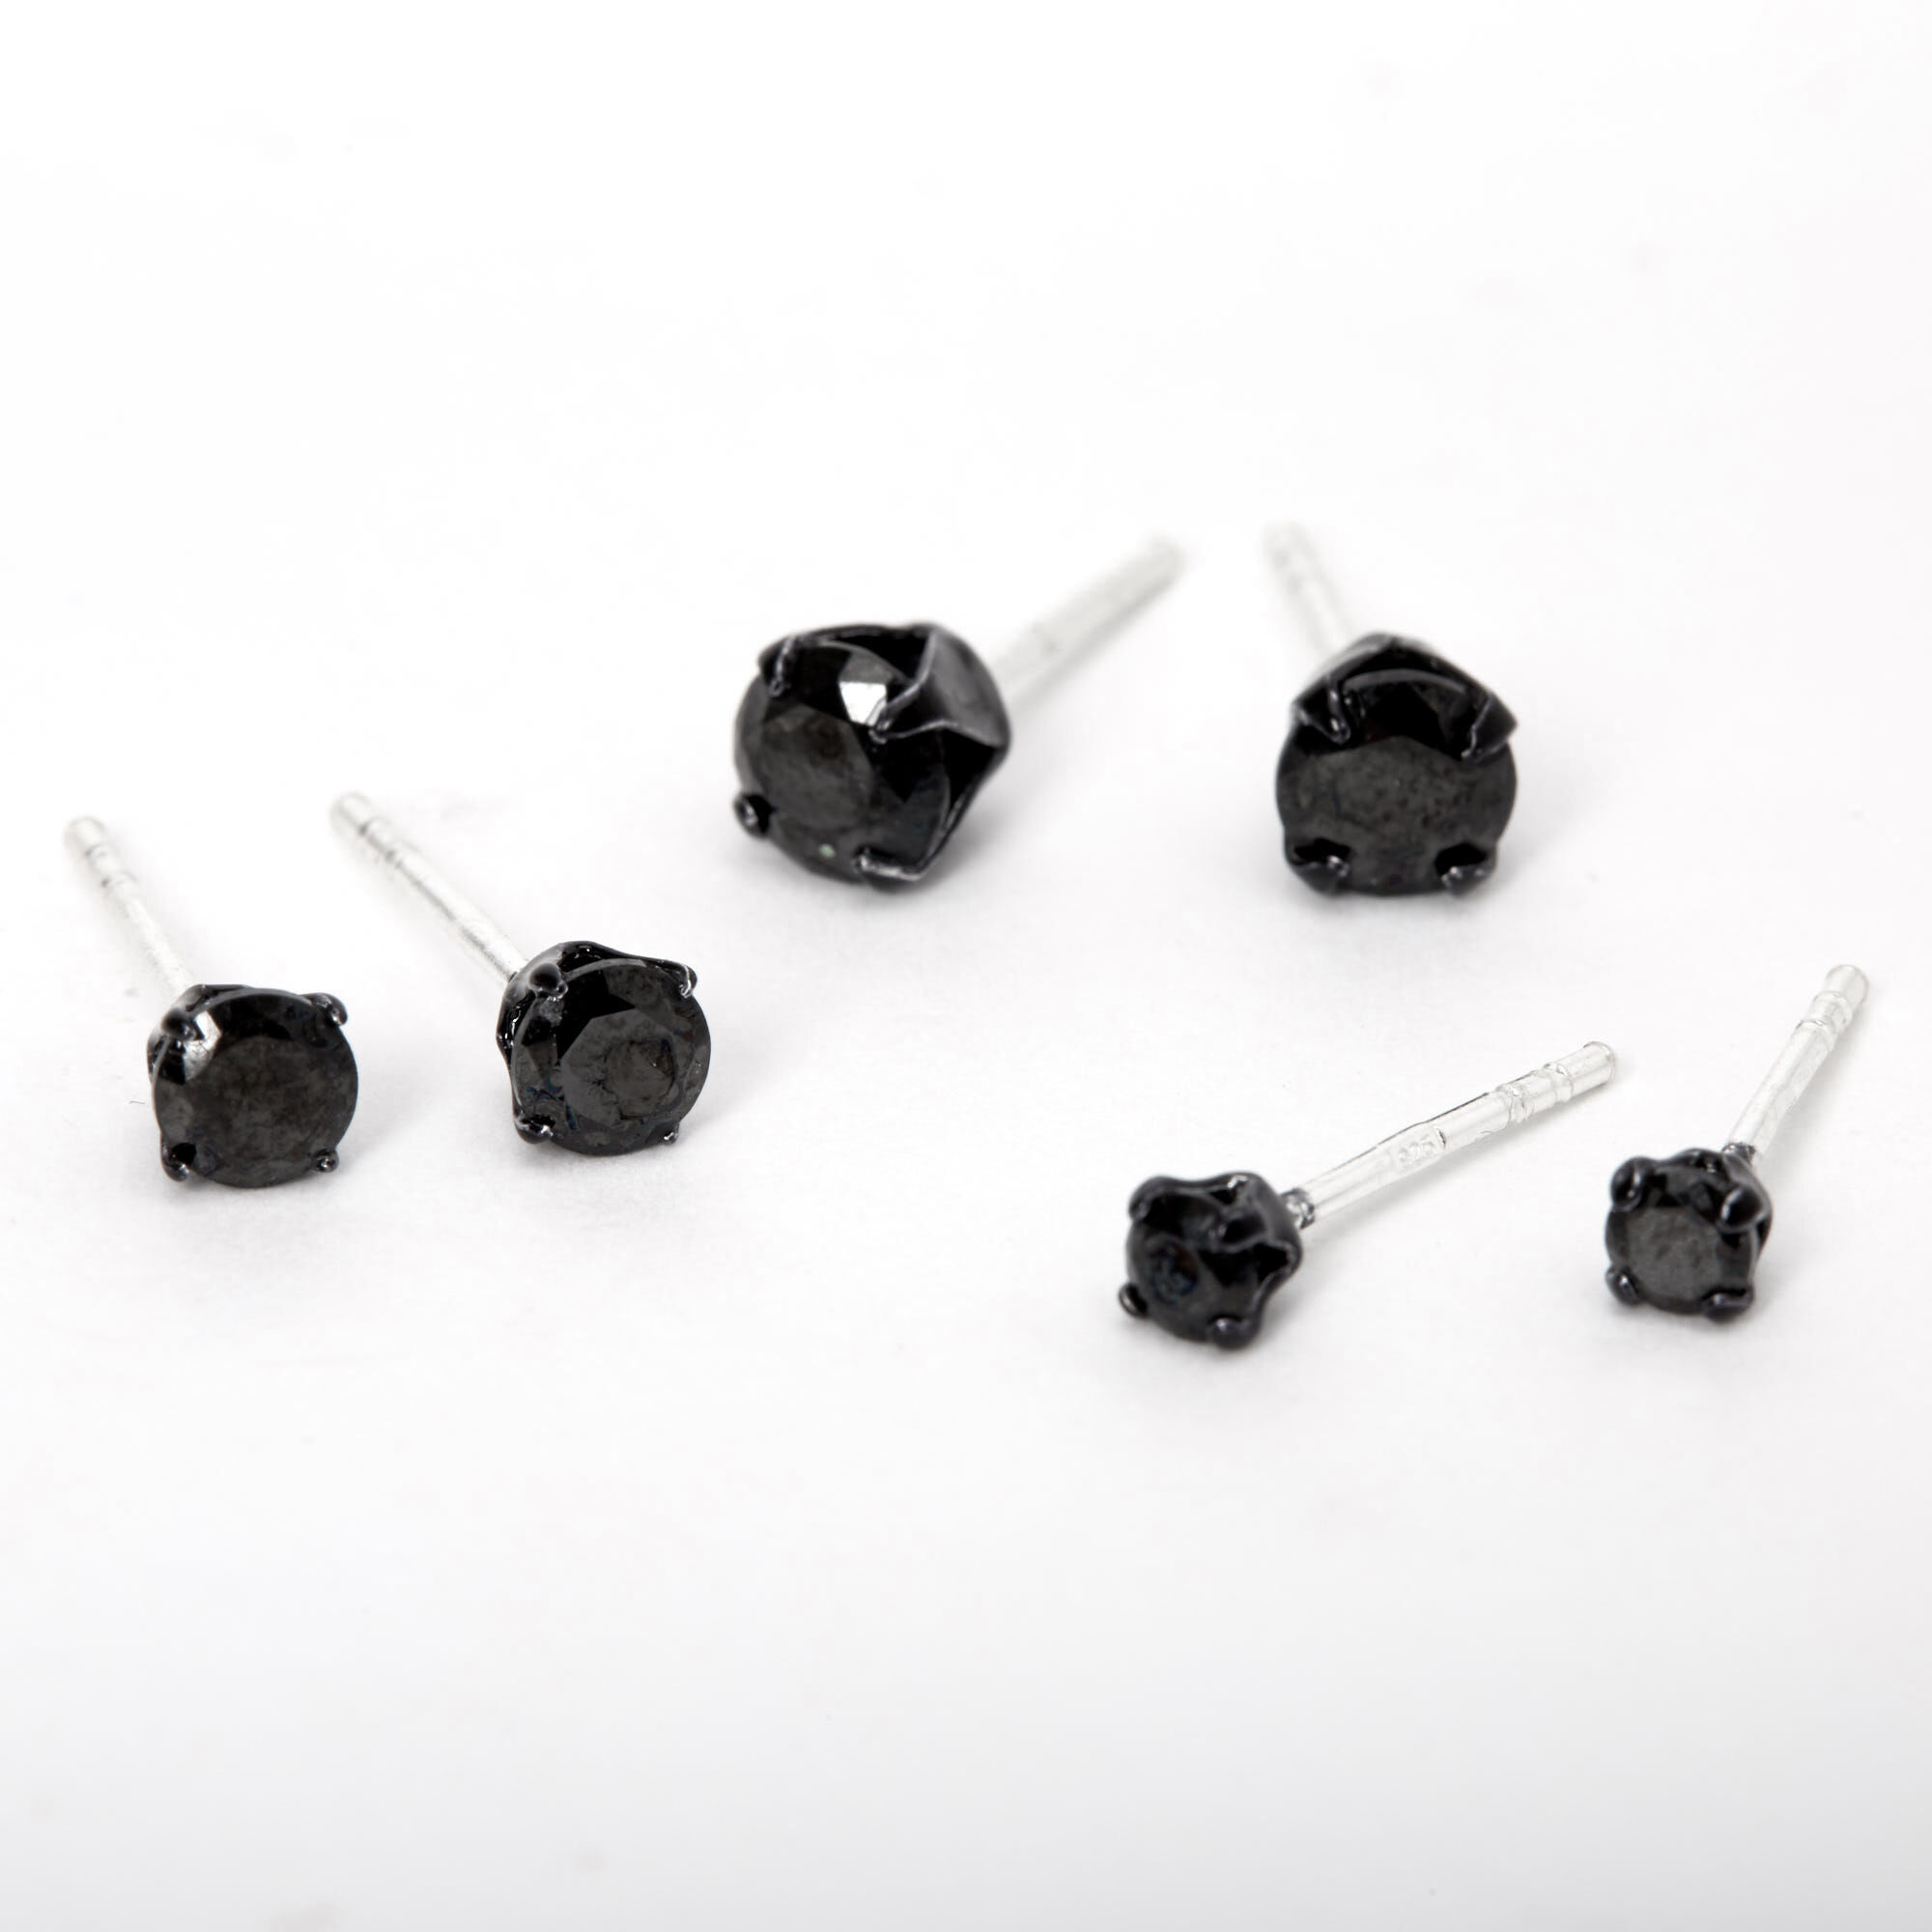 Stainless Steel Studs for Cartilage Nose and Lips Our Studs Include One of 3mm 4mm and 5mm